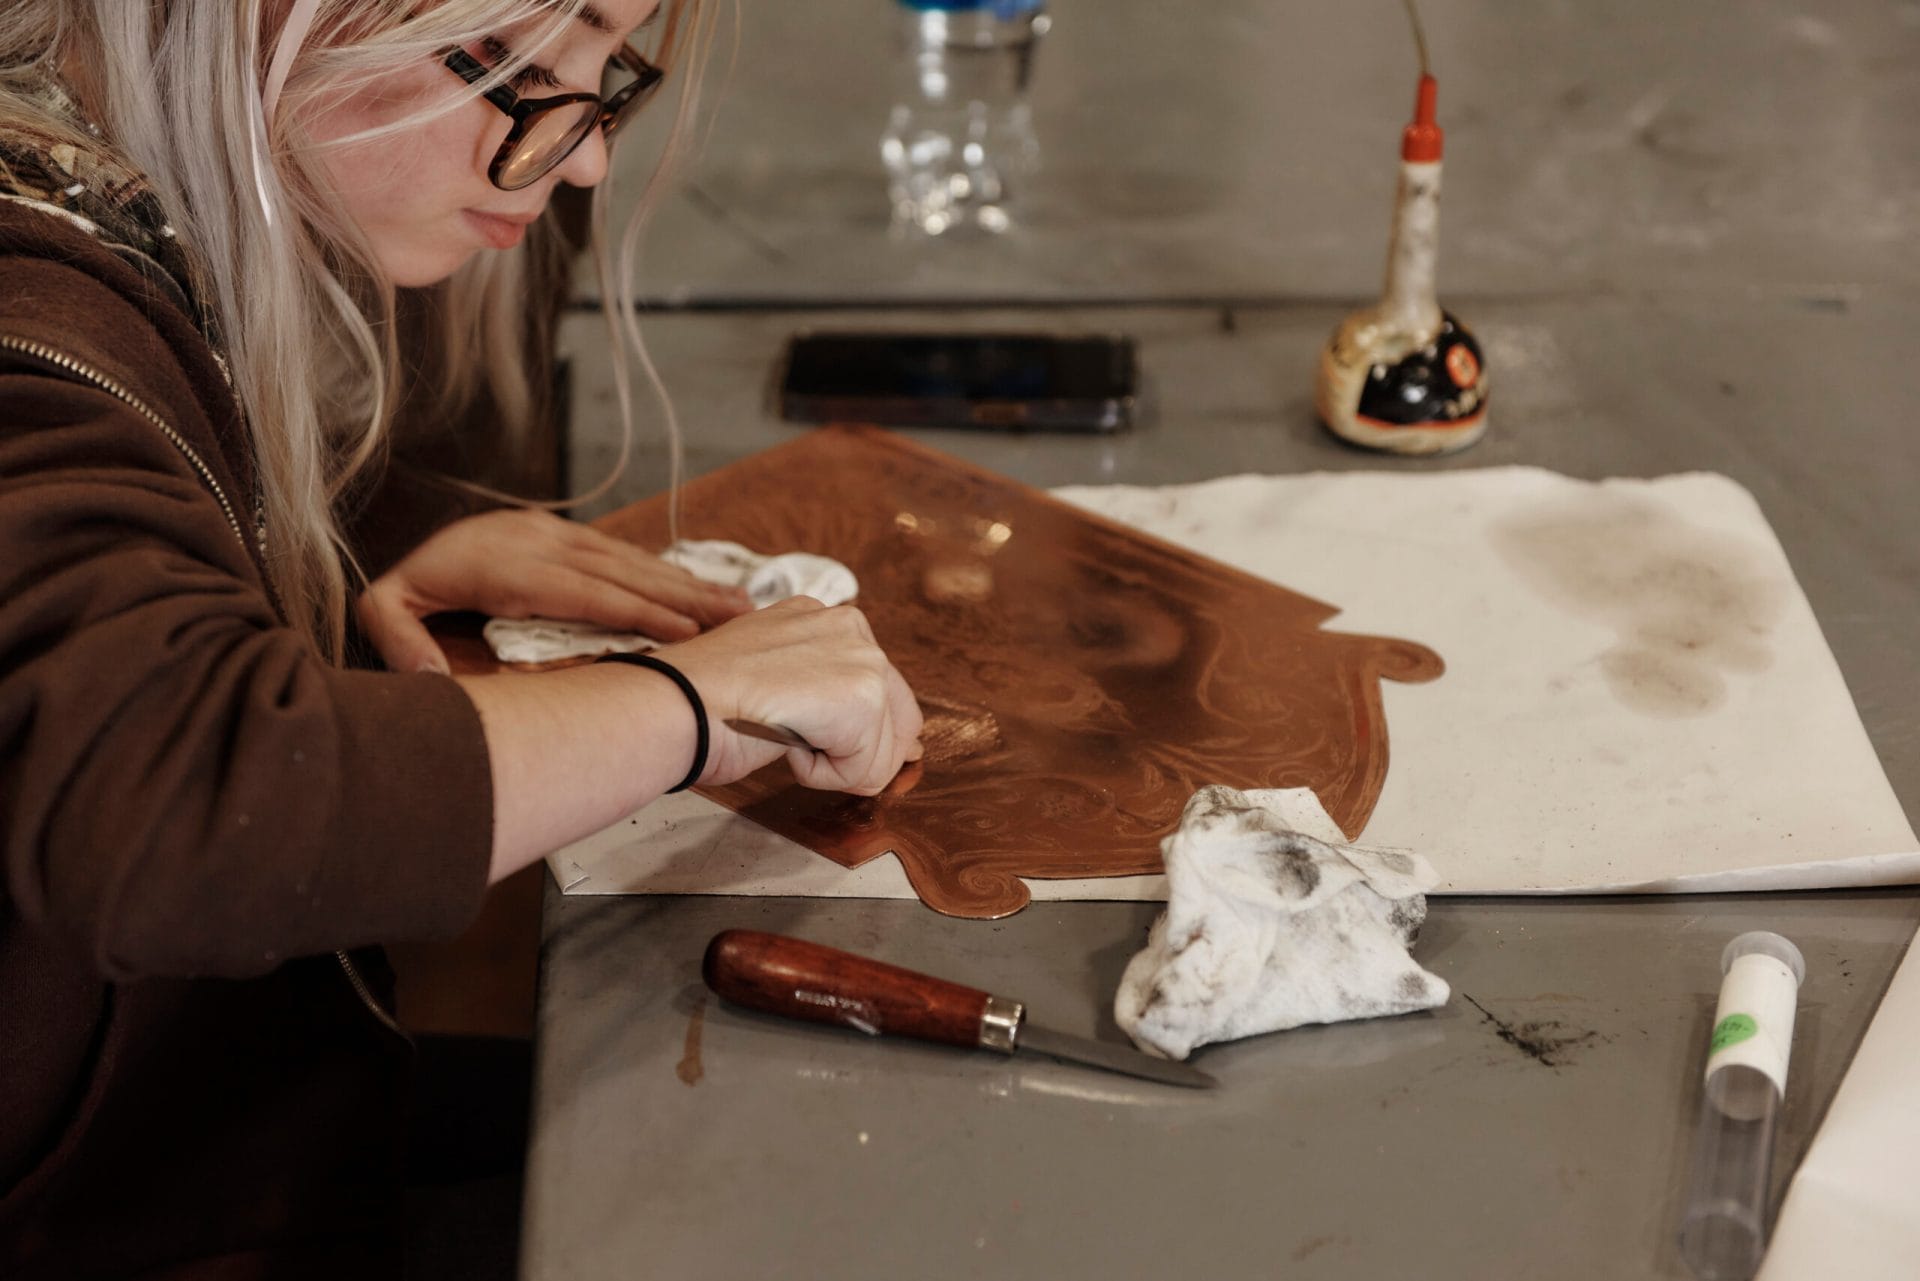 A student draws on a metal plate